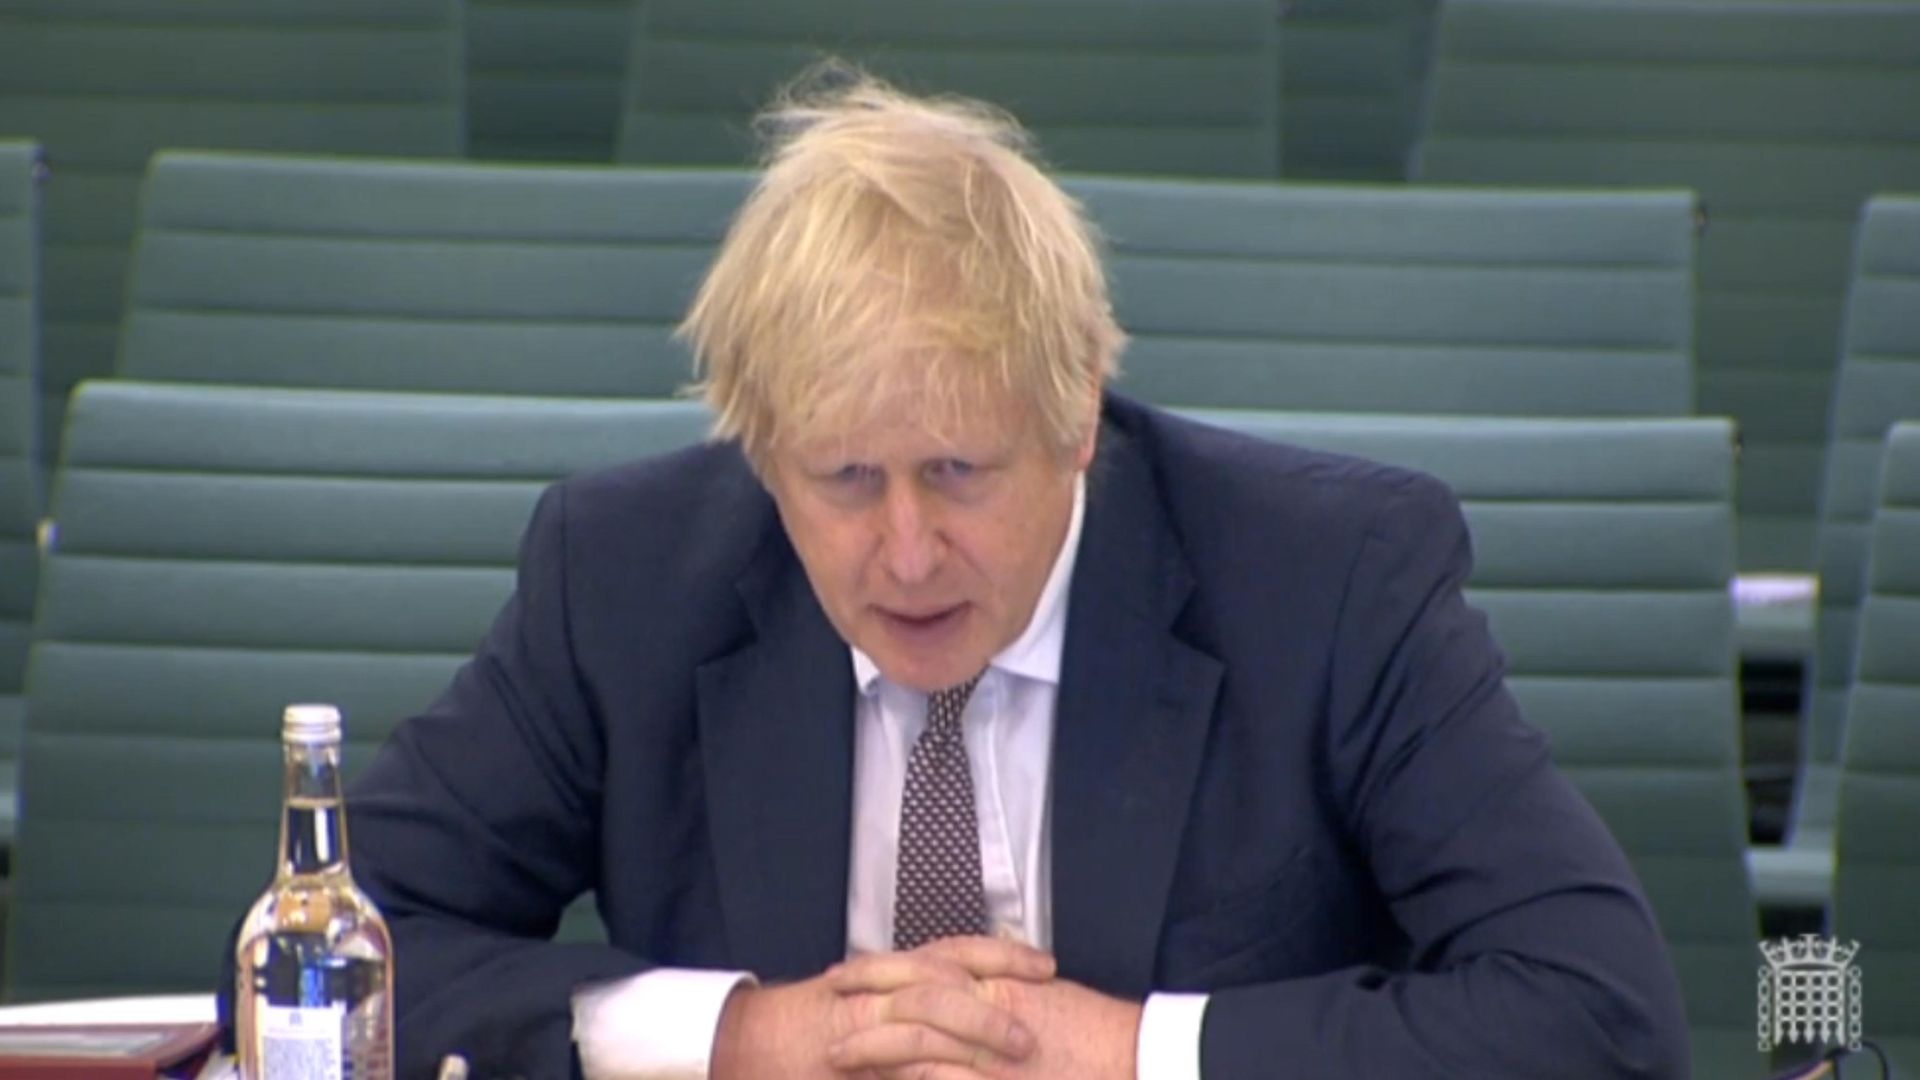 Prime Minister Boris Johnson answering questions from MPs on the House of Commons Liaison Committee in Westminster, London. - Credit: PA